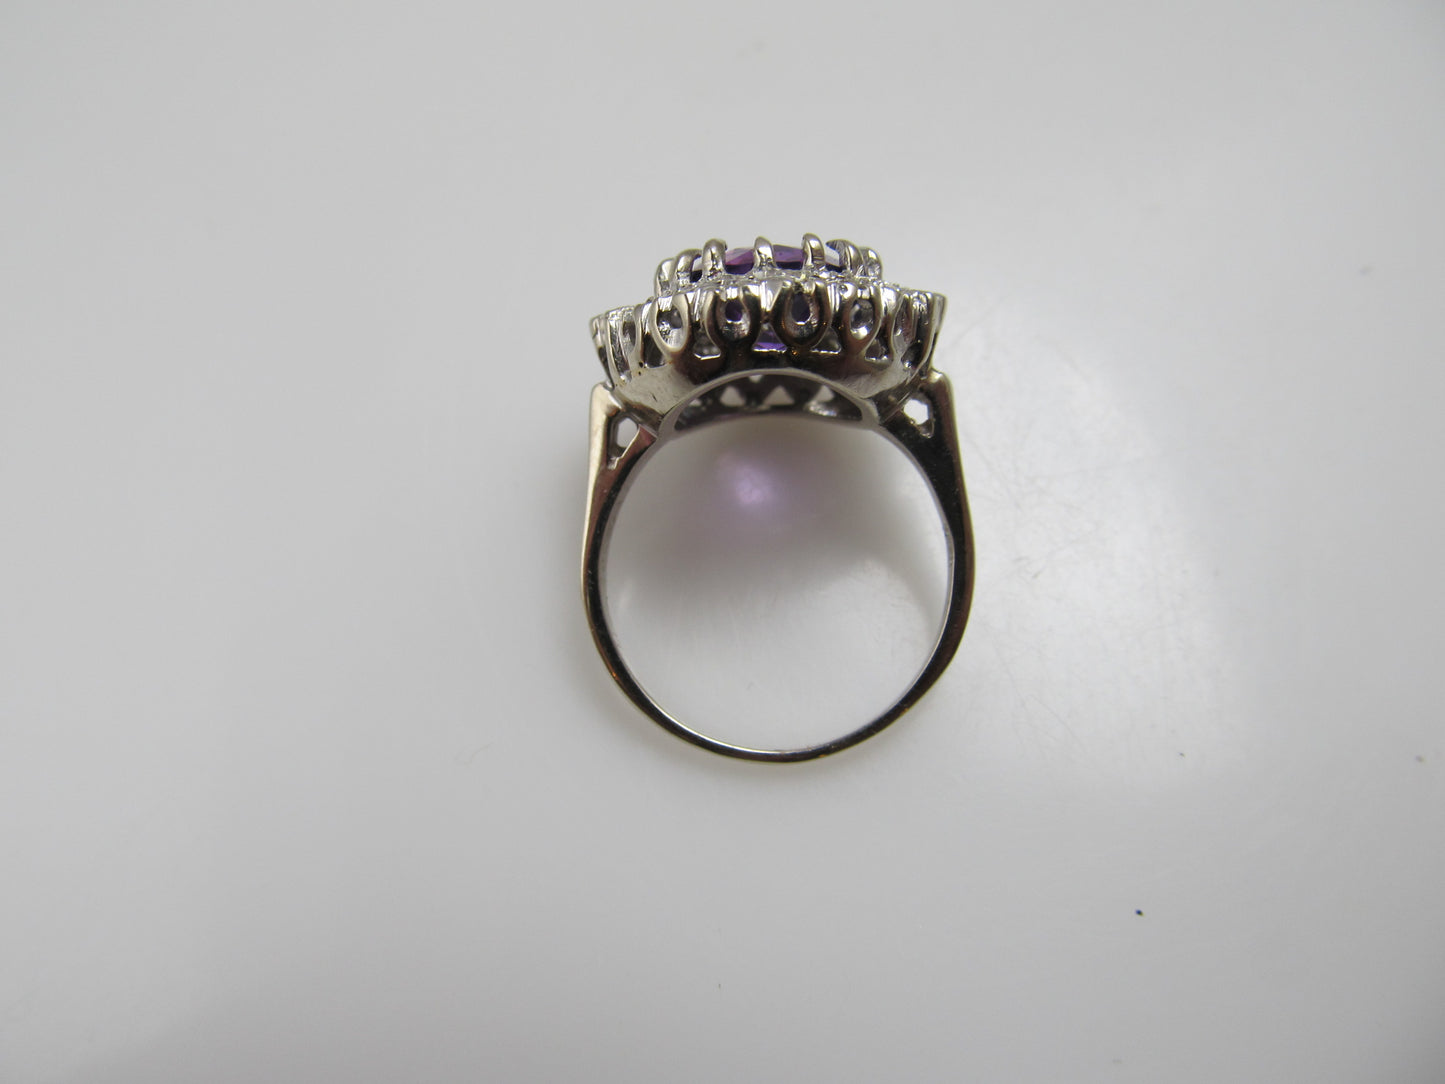 14k white gold ring with a 2 1/2ct amethyst and 1/2ct in diamonds